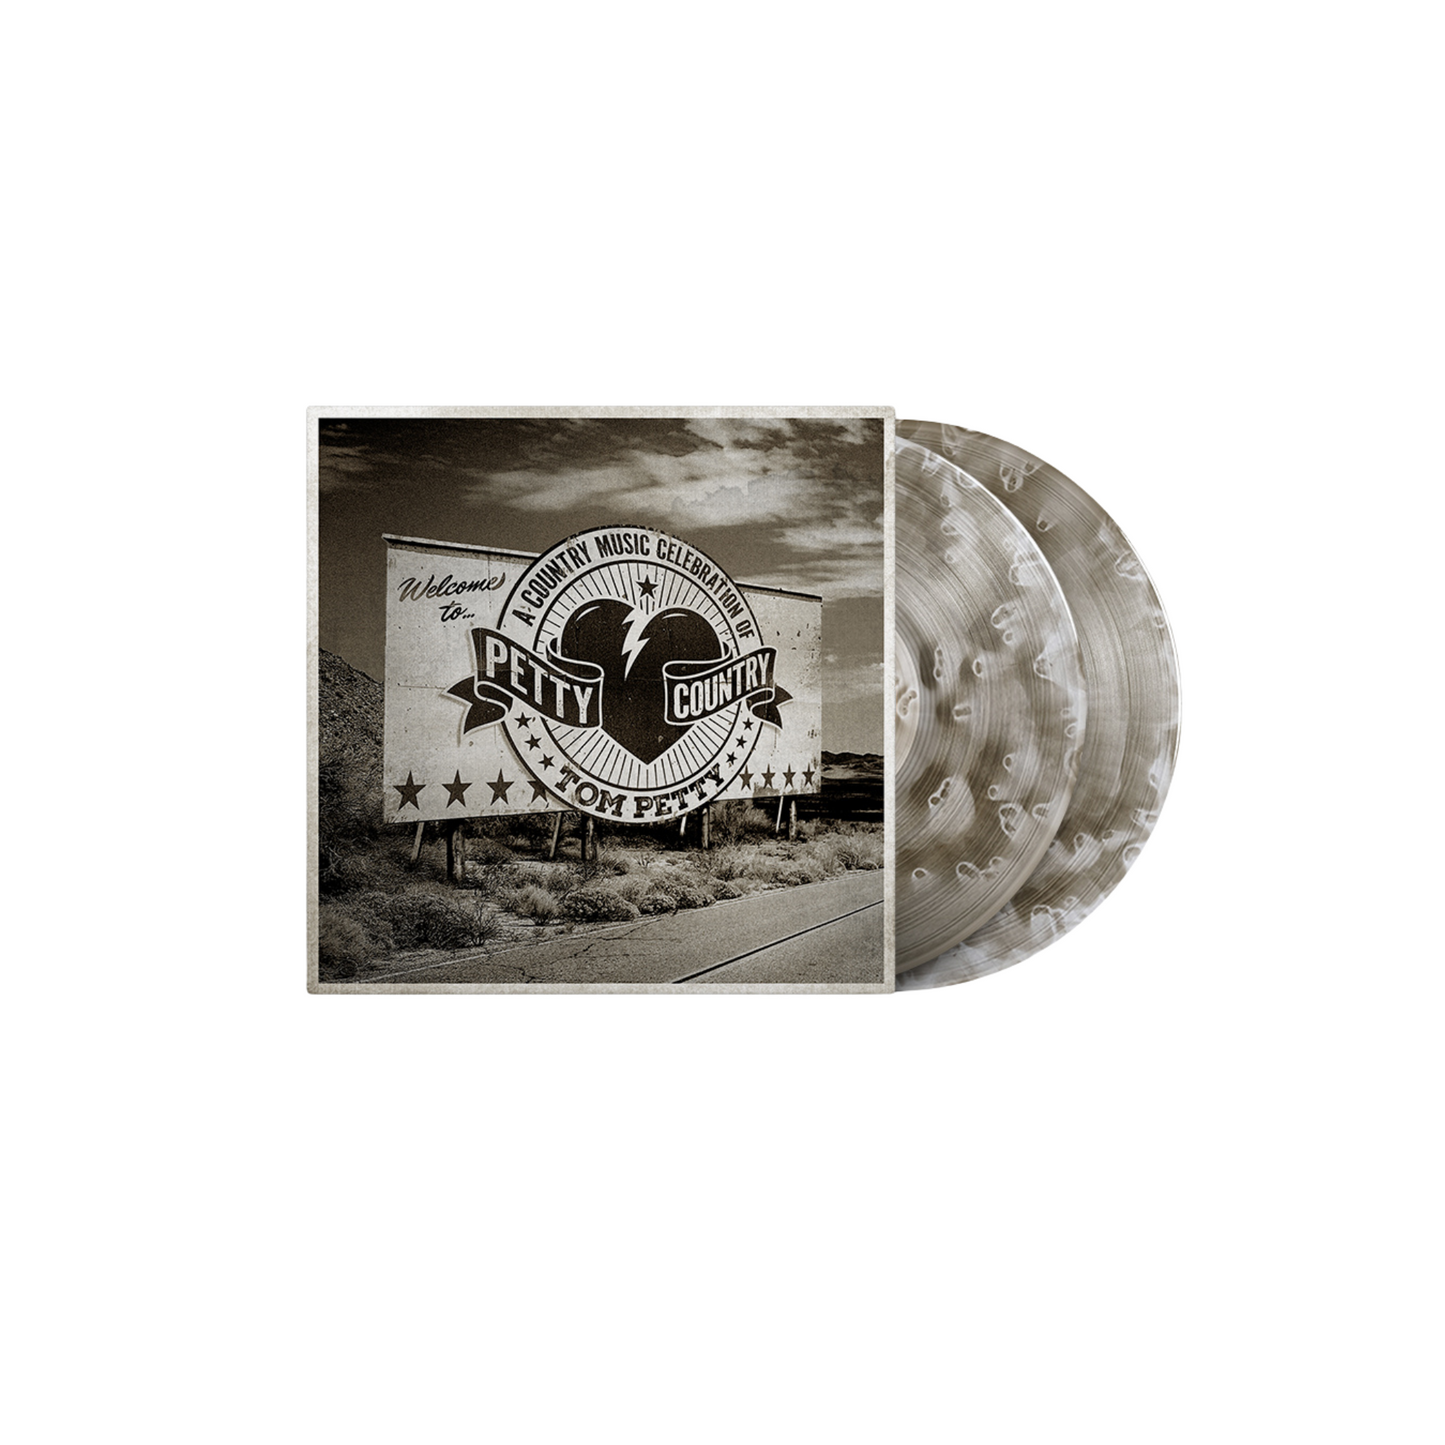 Petty Country: A Country Music Celebration Of Tom Petty- 2 LP Cloud Vinyl- Tom Petty Store Exclusive